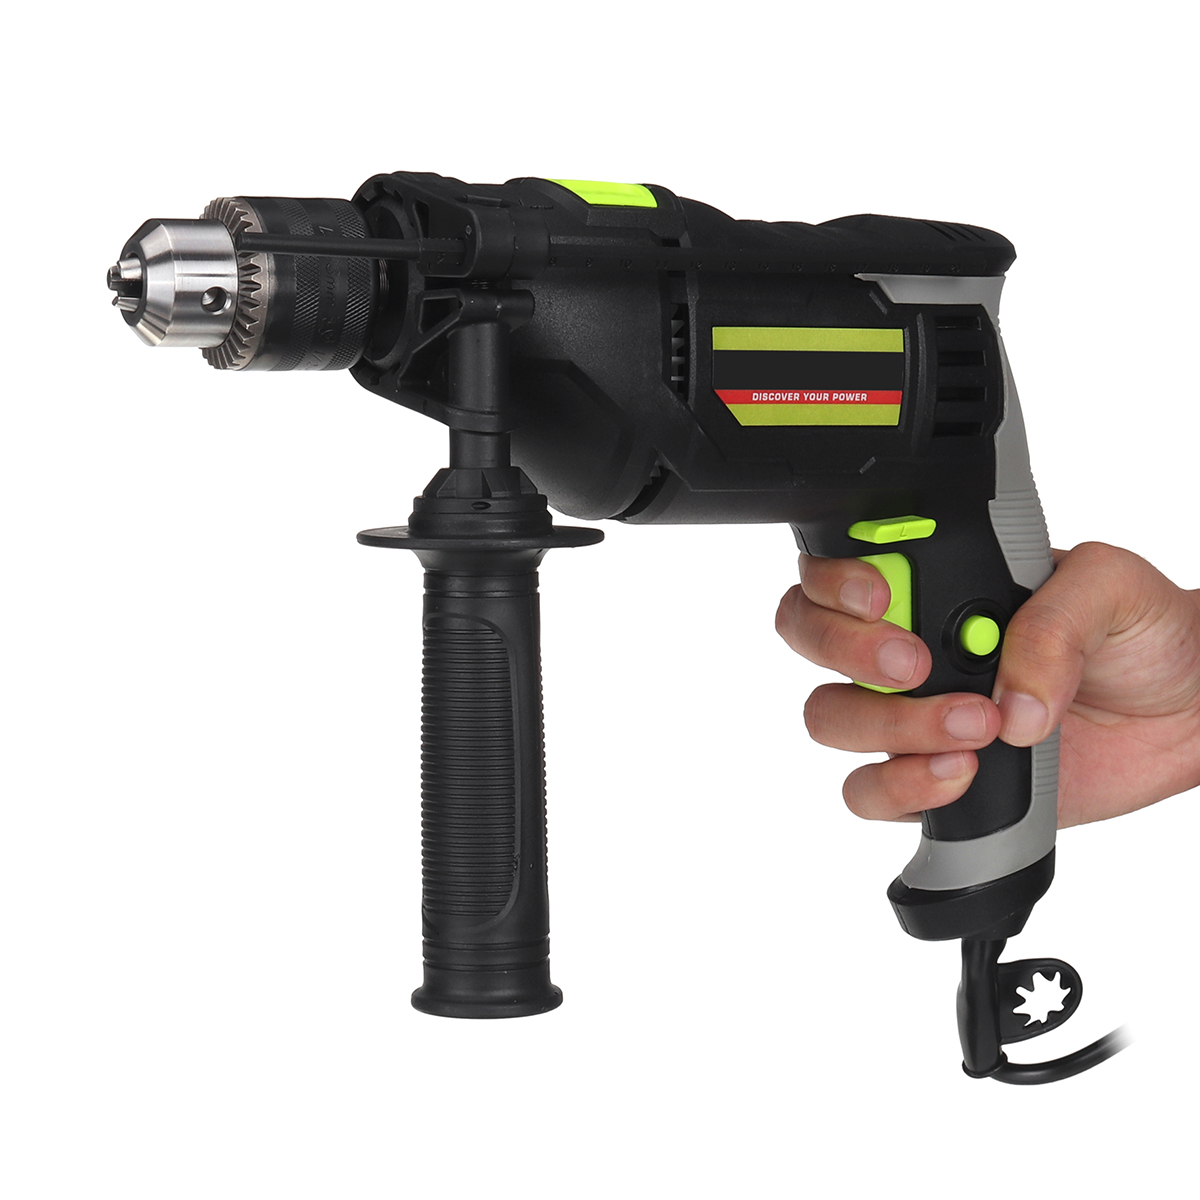 220V-710W-Electric-Impact-Drill-Rotary-Hammer-Concrete-Punch-Chisel-Driver-Hand-Tools-1736353-10